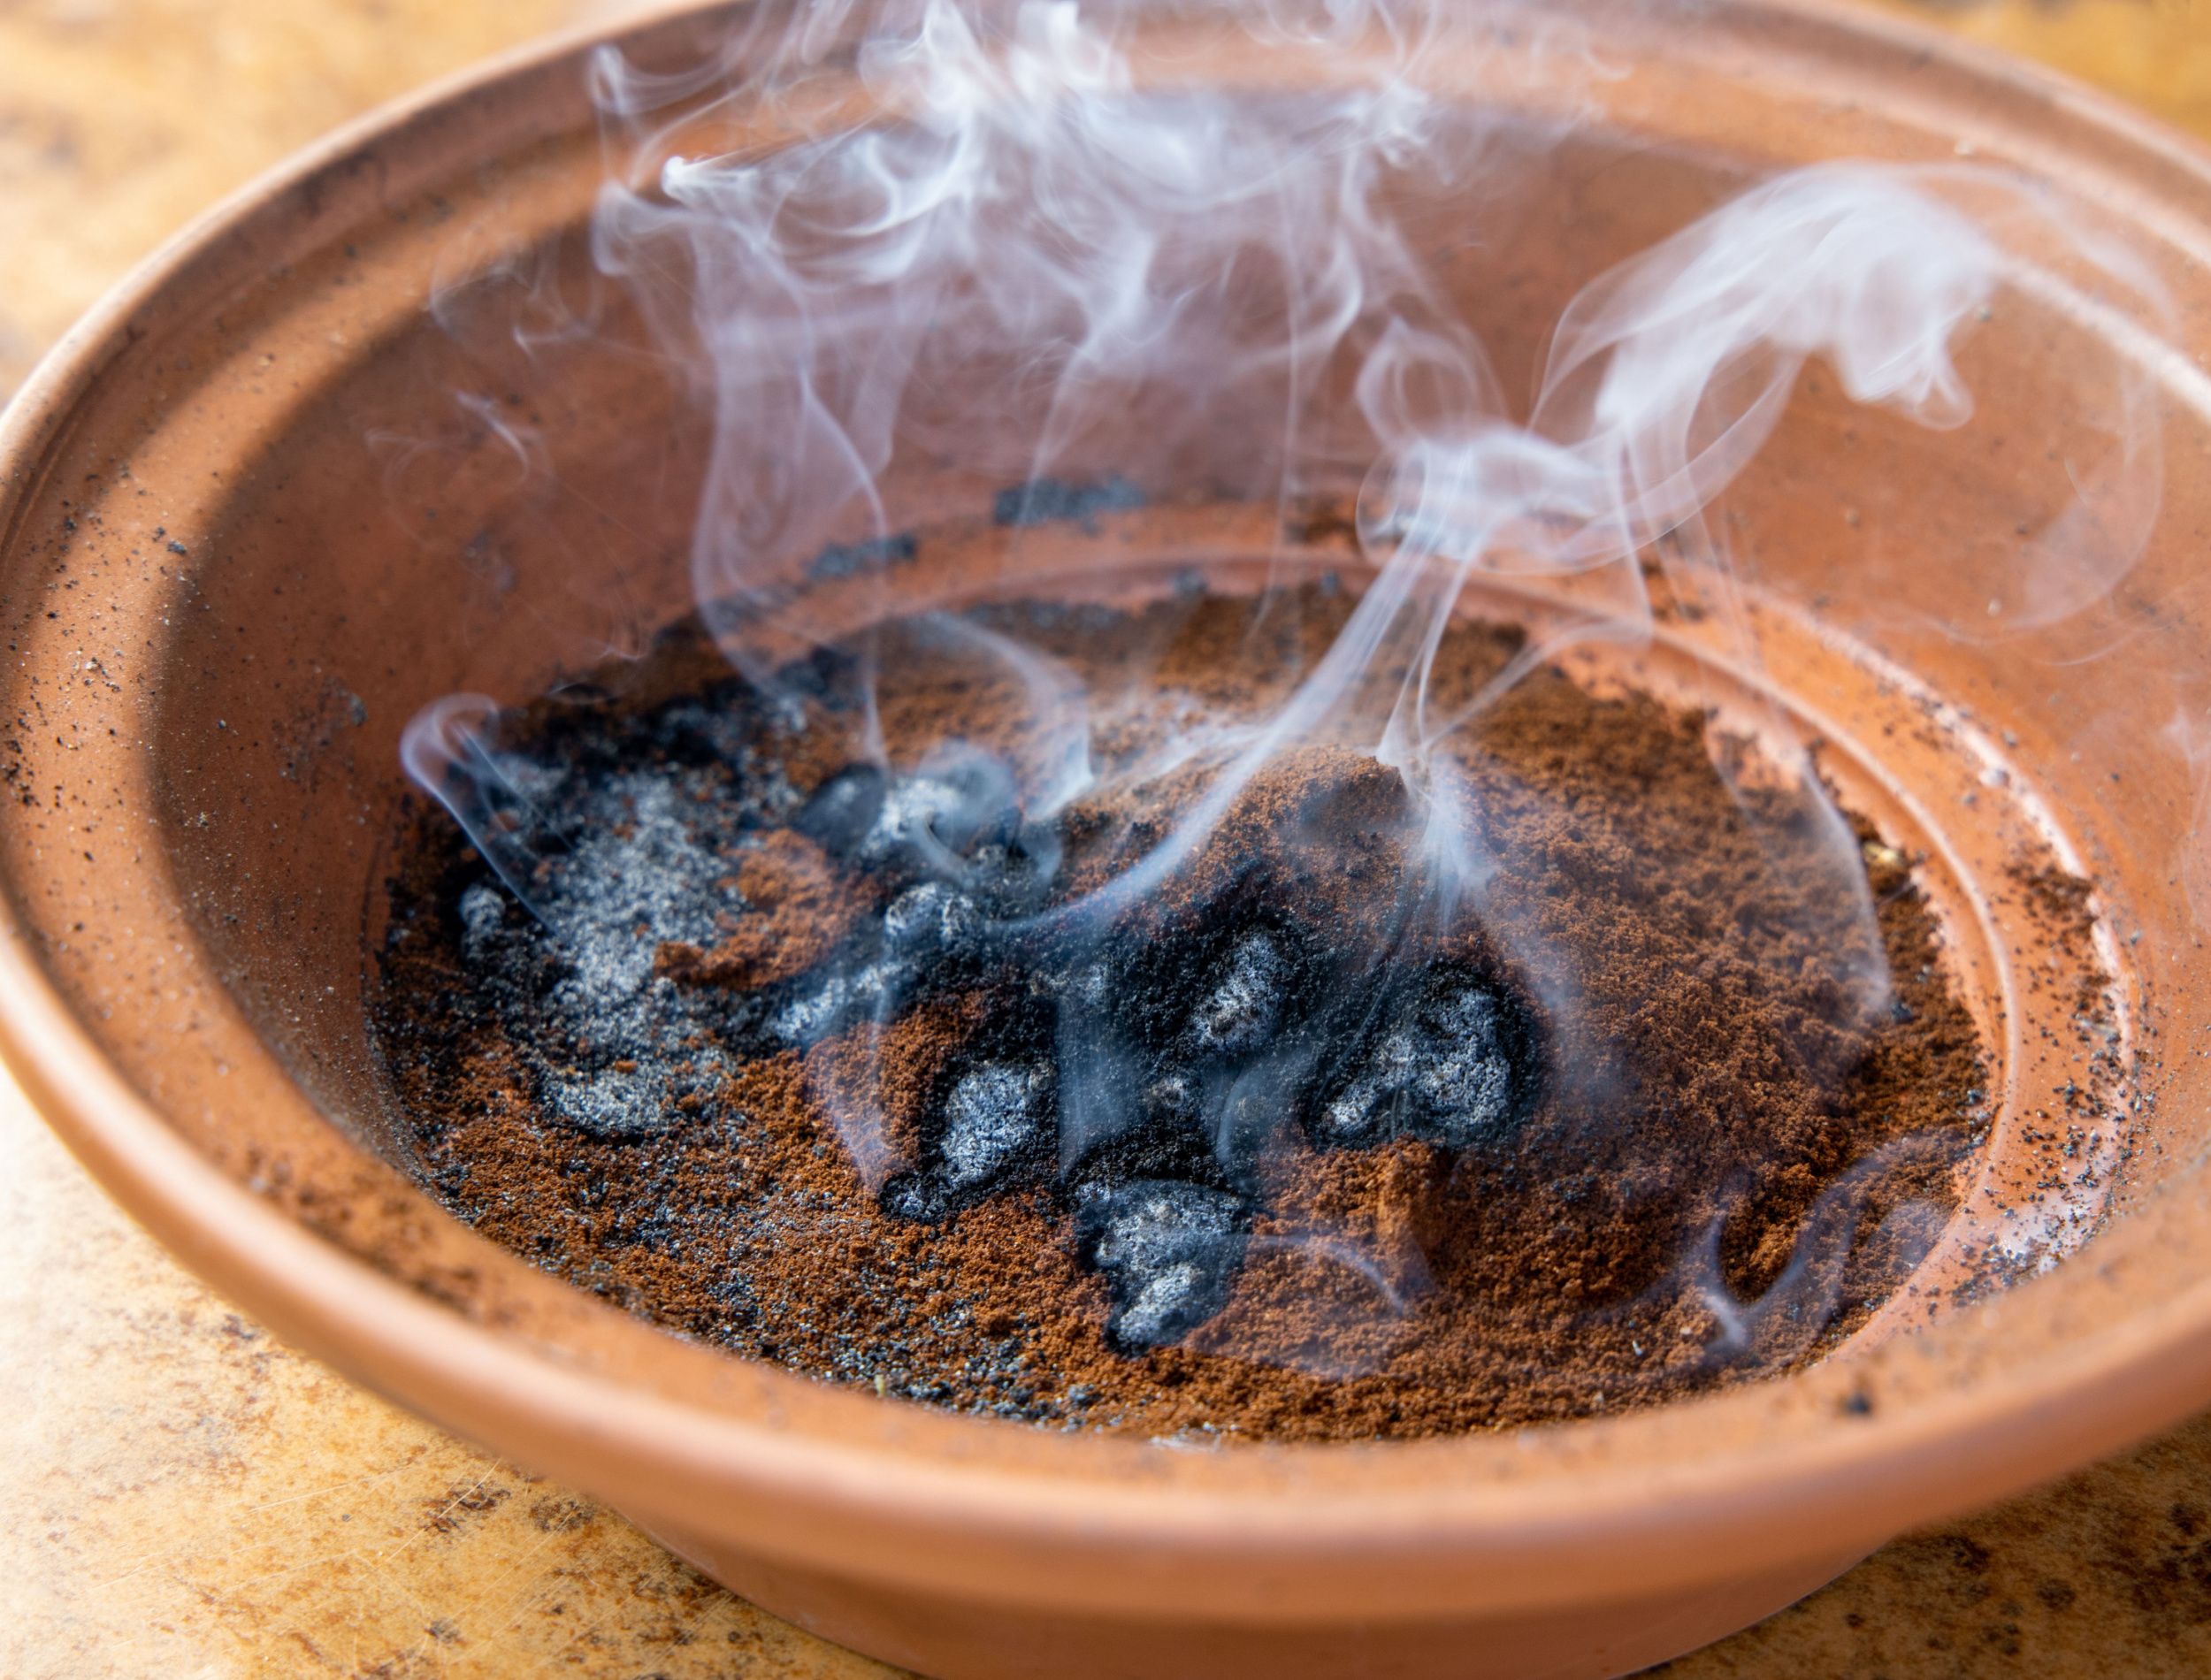 Coffee ground on fire and smoking from a ceramic dish